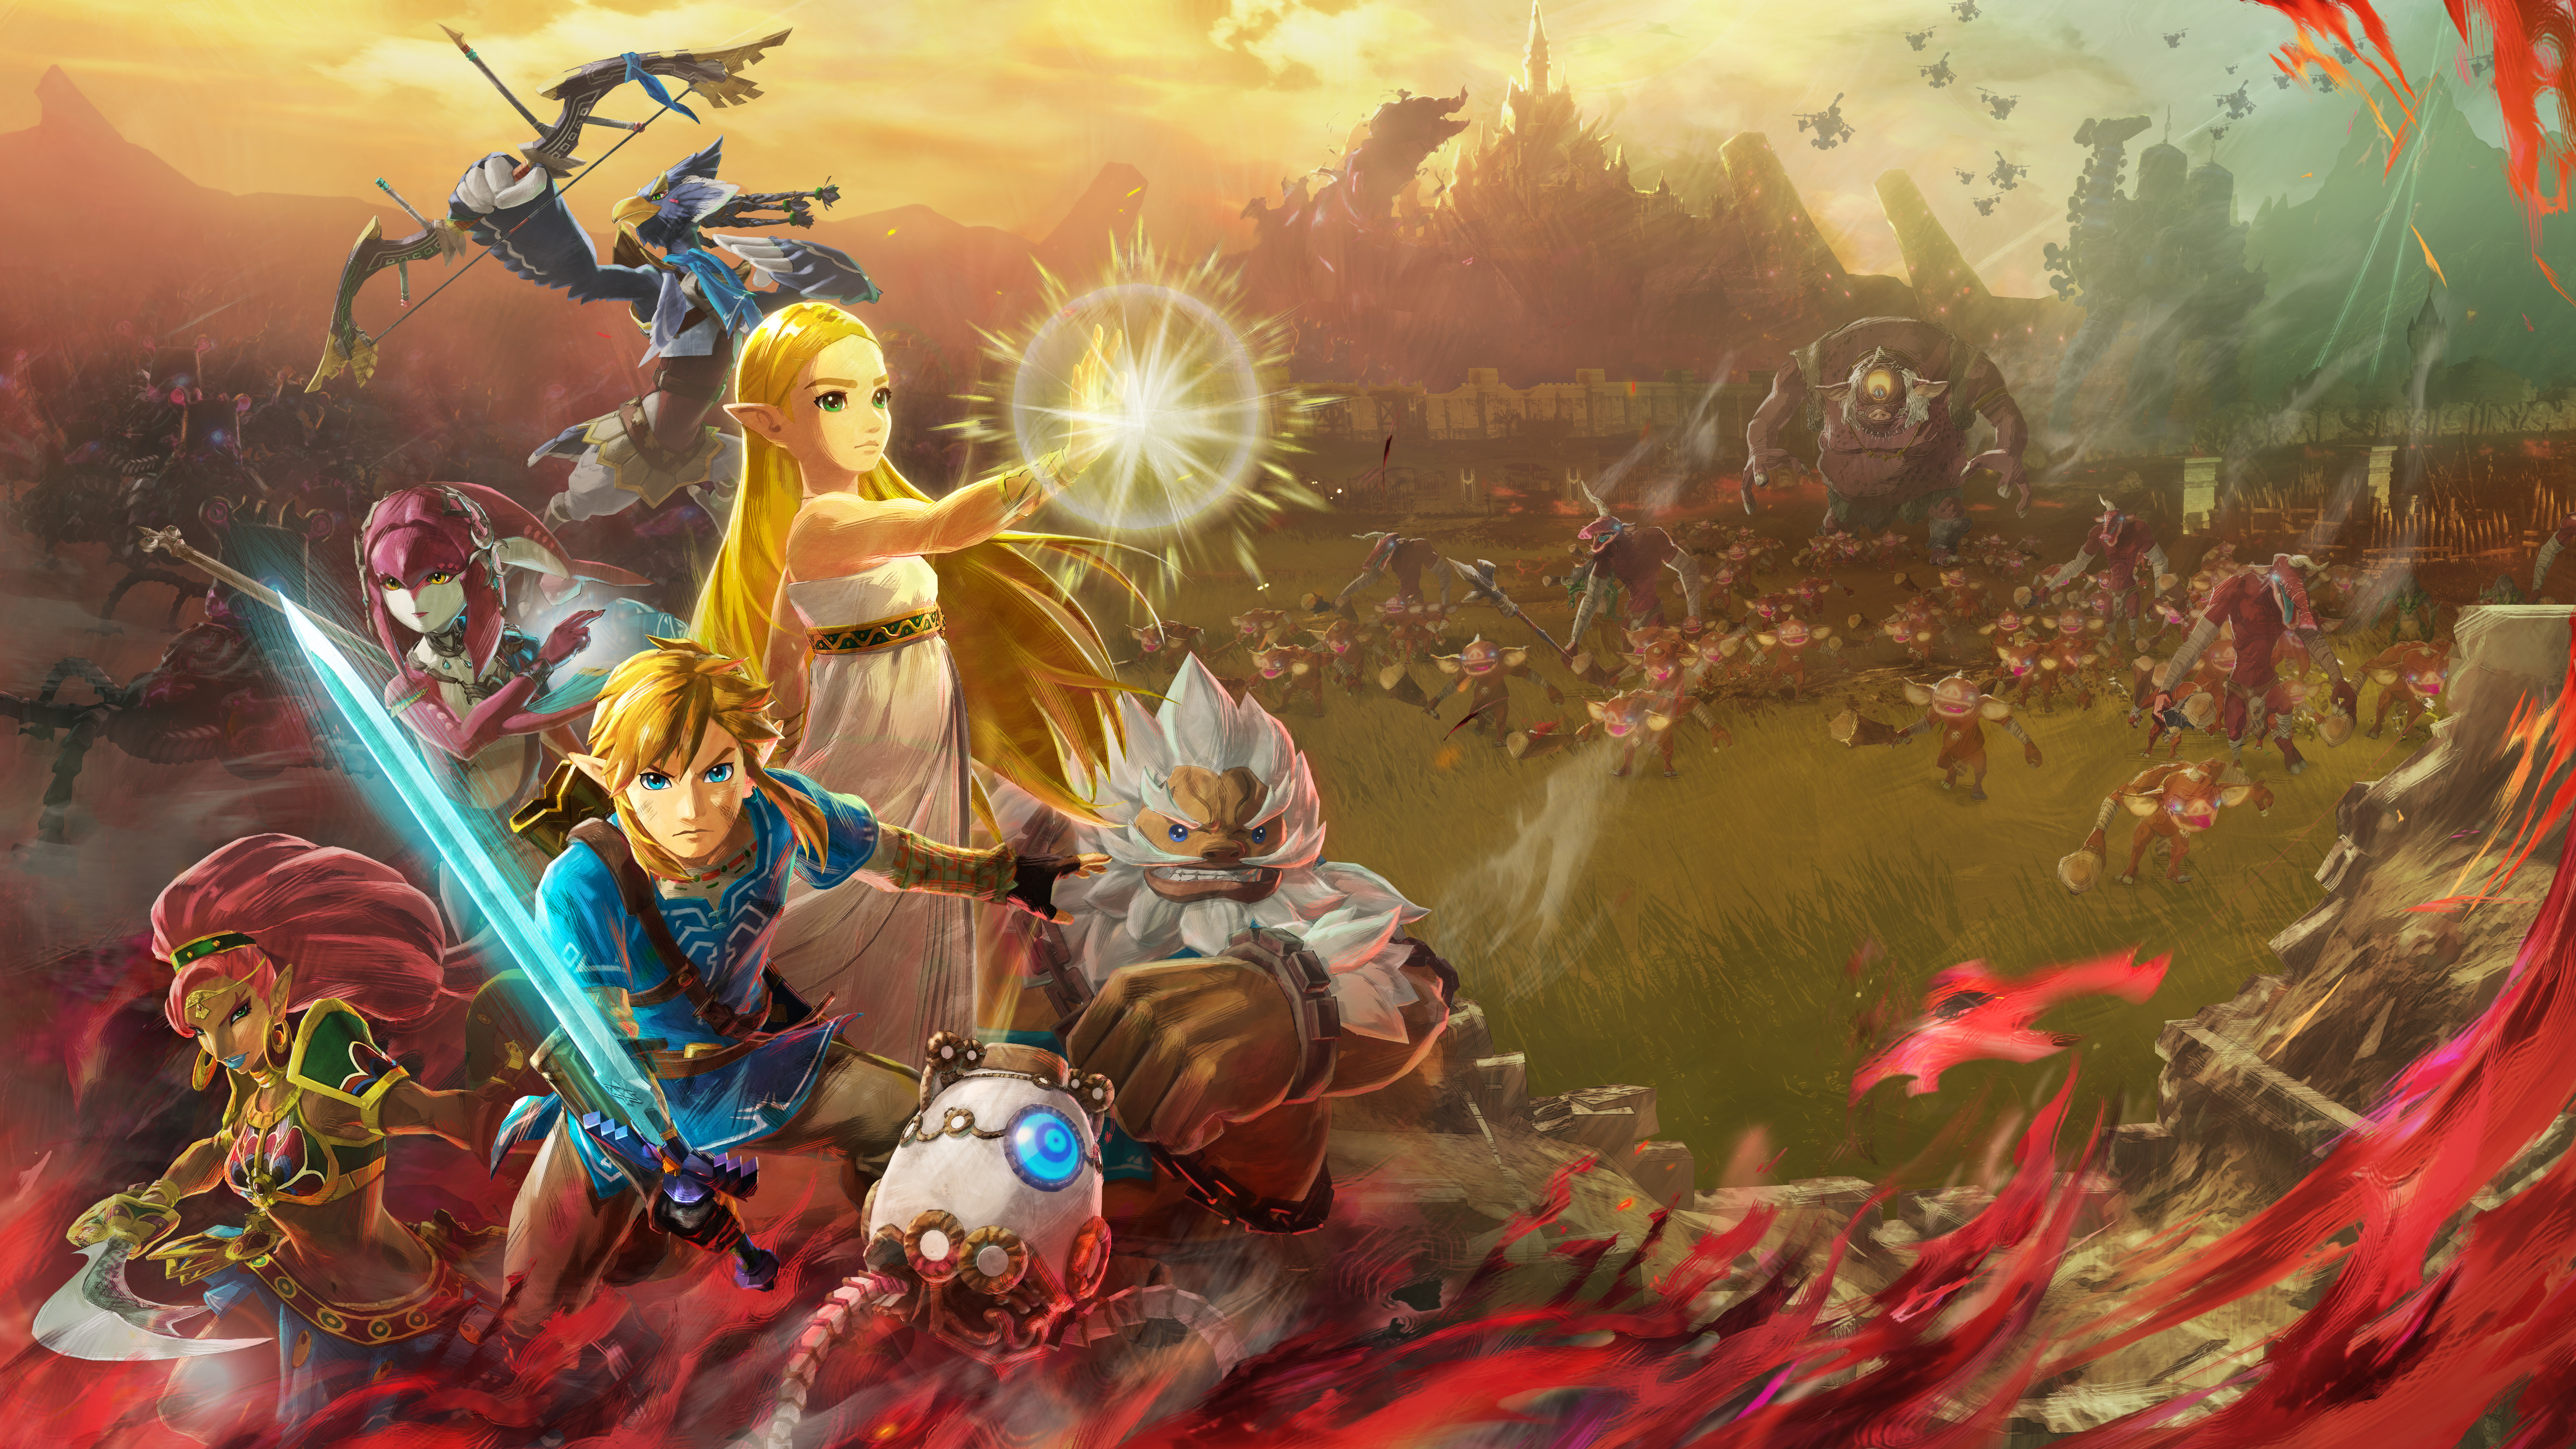 Video Game Hyrule Warriors: Age of Calamity HD Wallpaper | Background Image